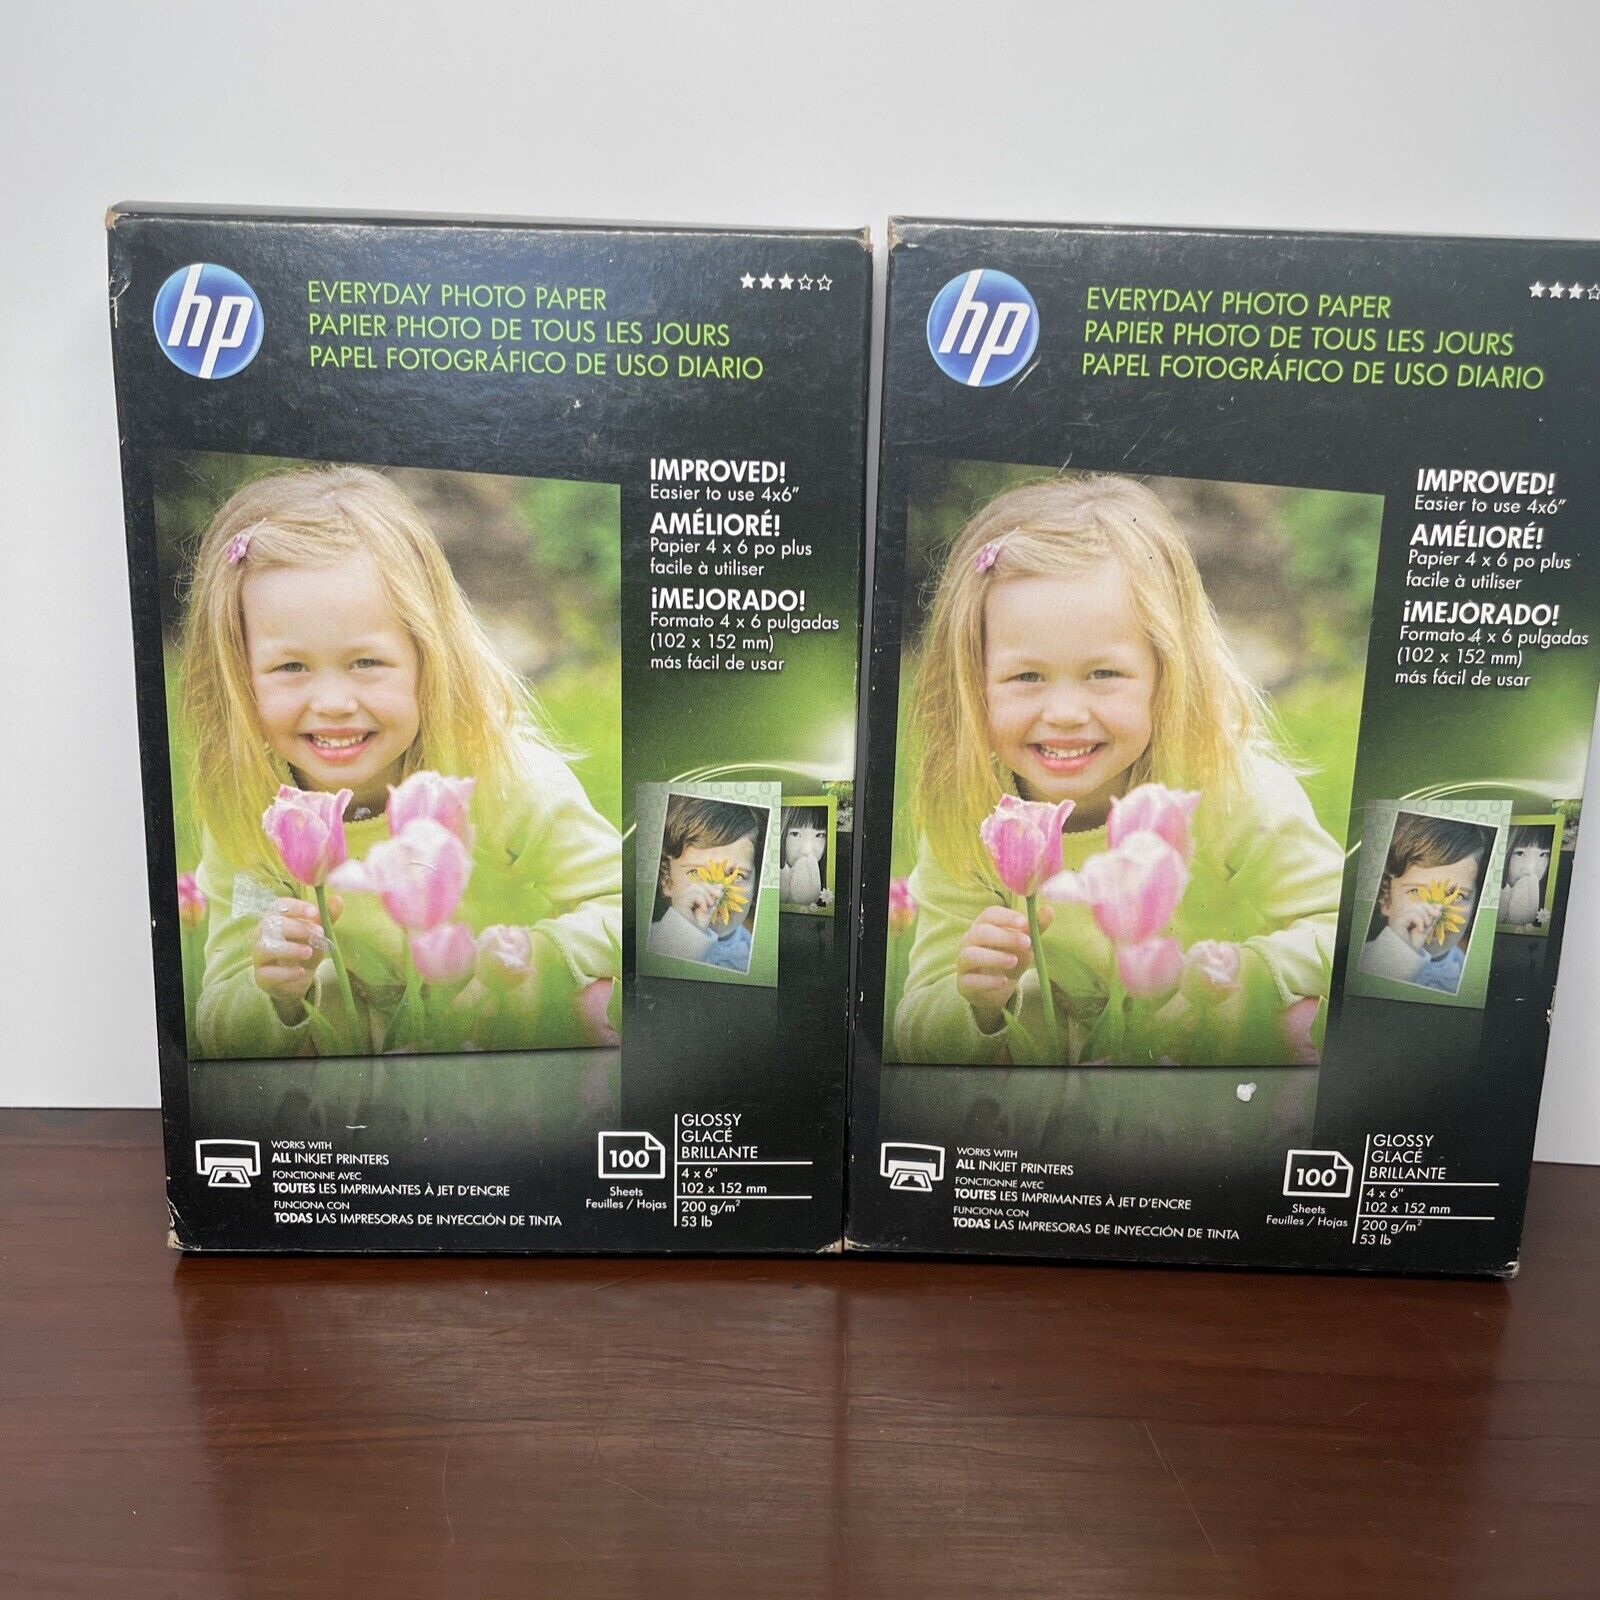 HP Genuine Everyday Photo Paper 100 Sheets 4x6 Glossy 2 Pack 200 Sheets Total